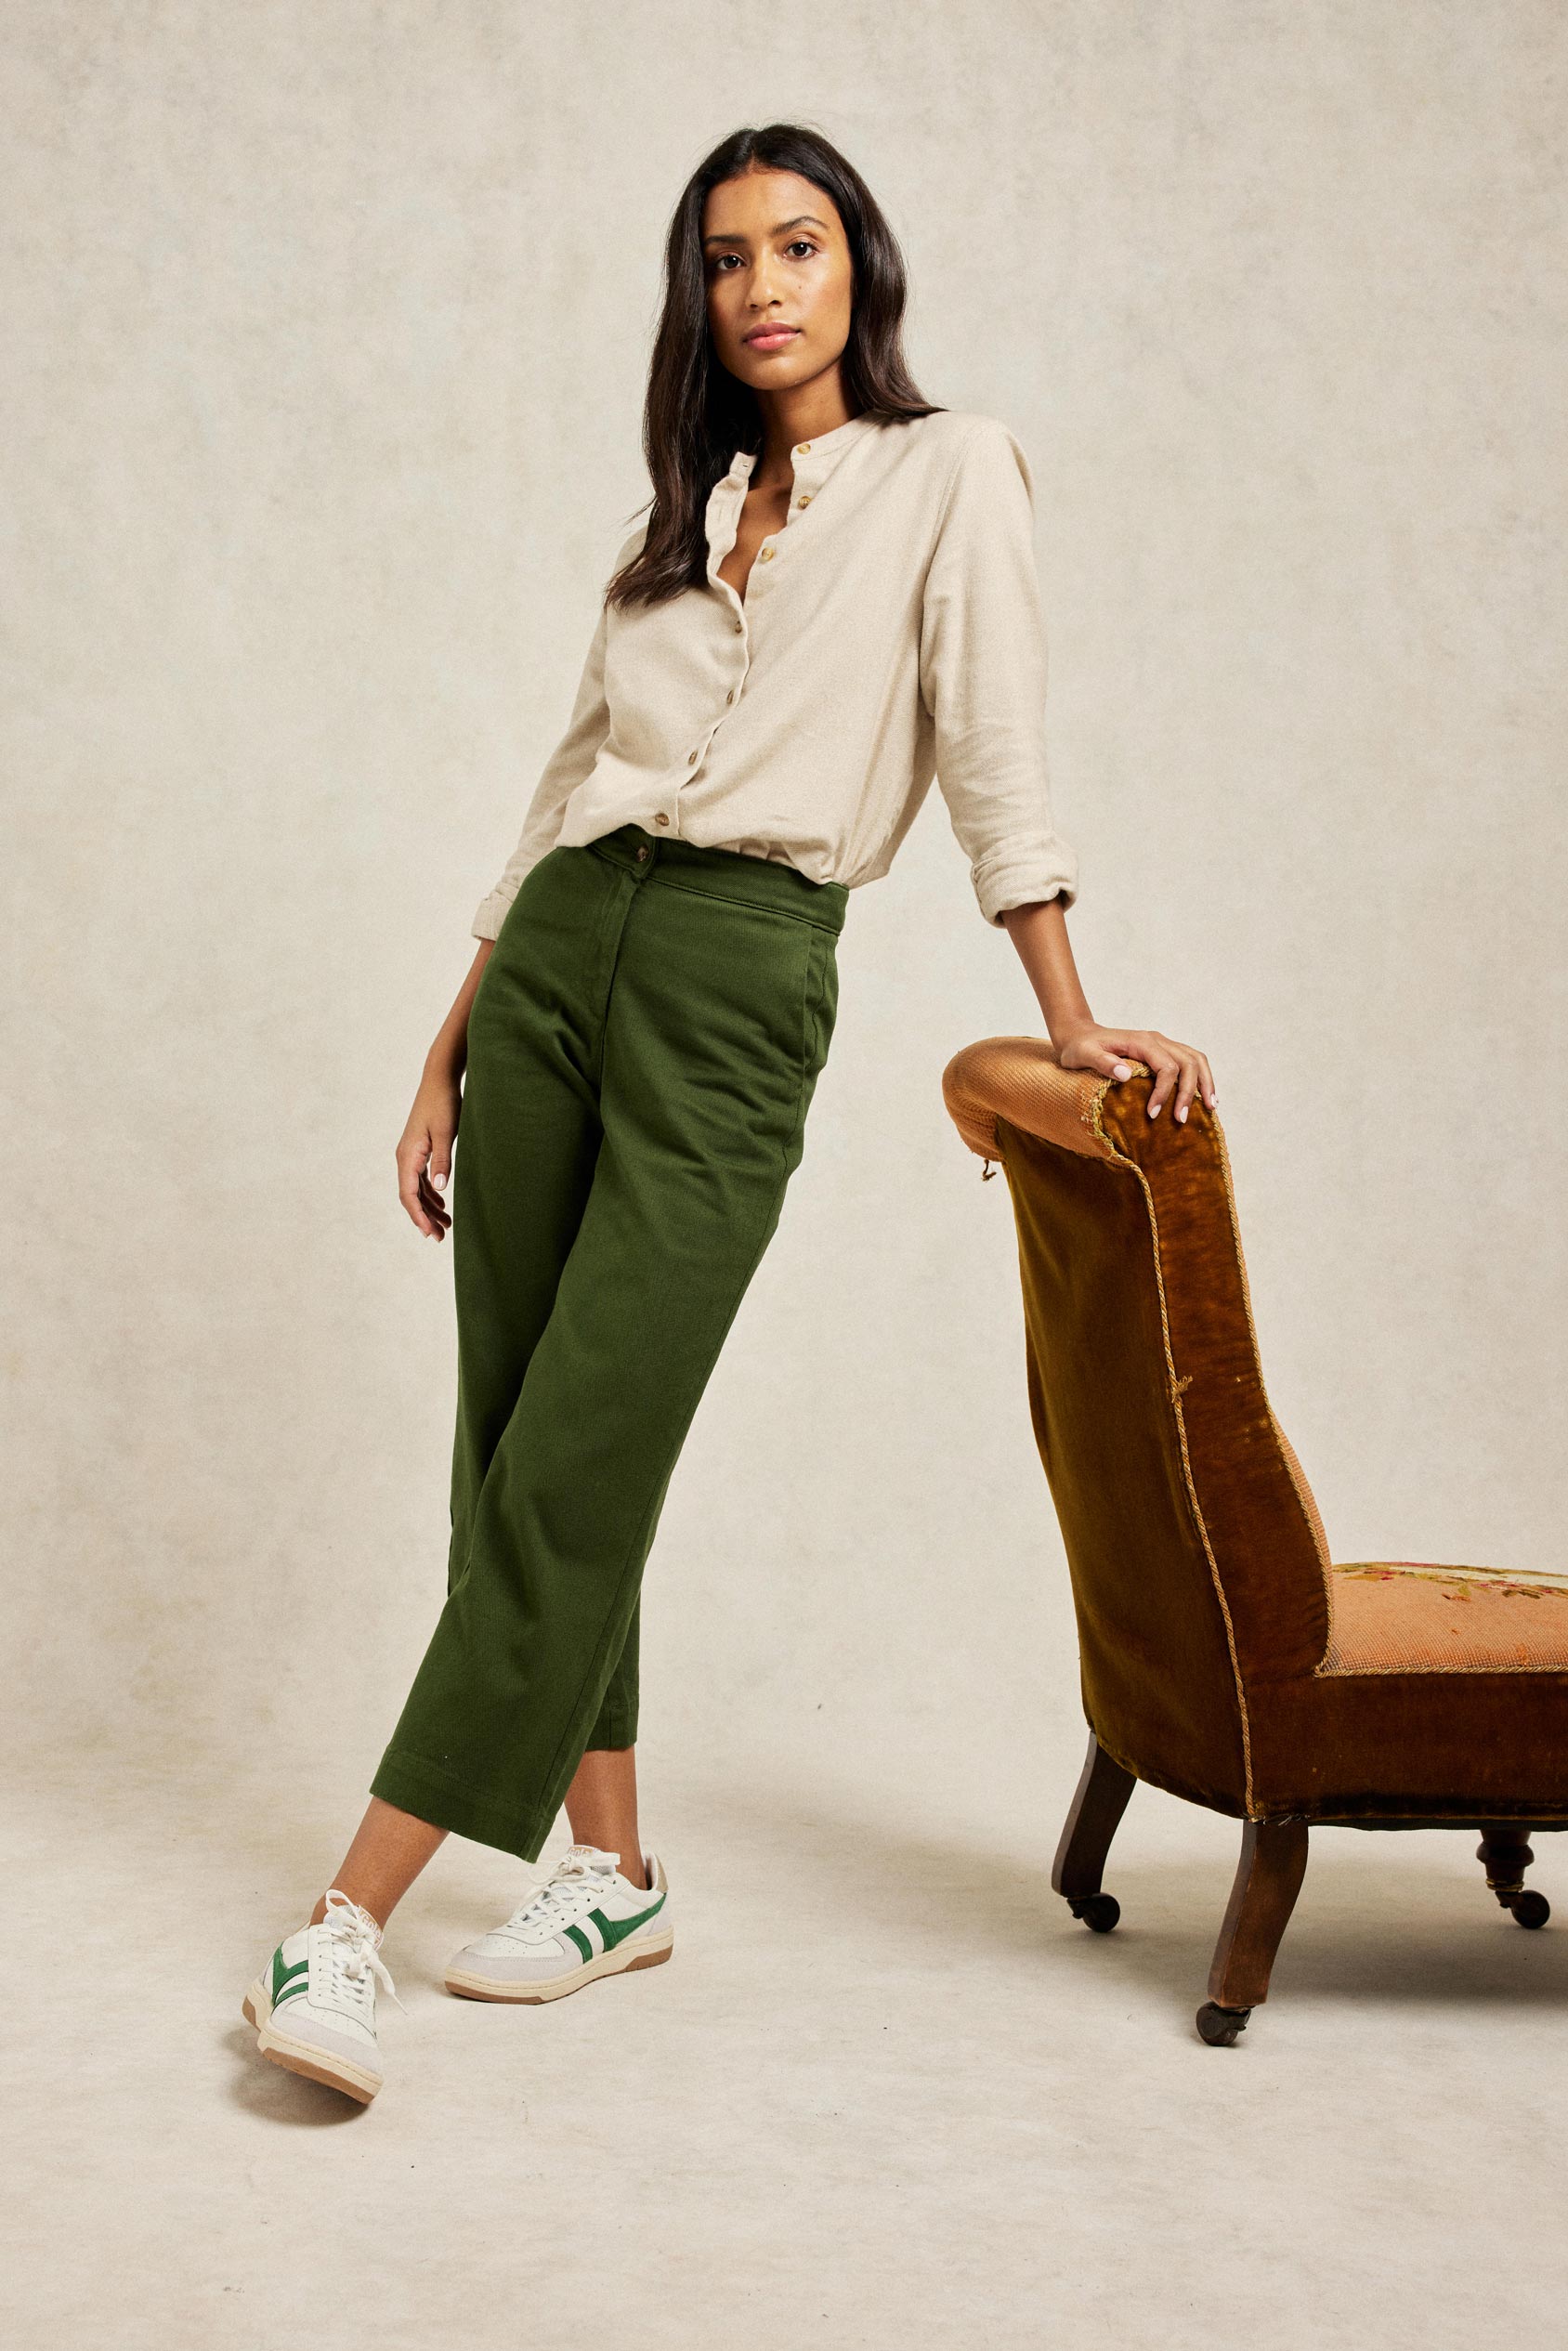 These Women's Cropped Pants Get Rave Reviews from Travelers